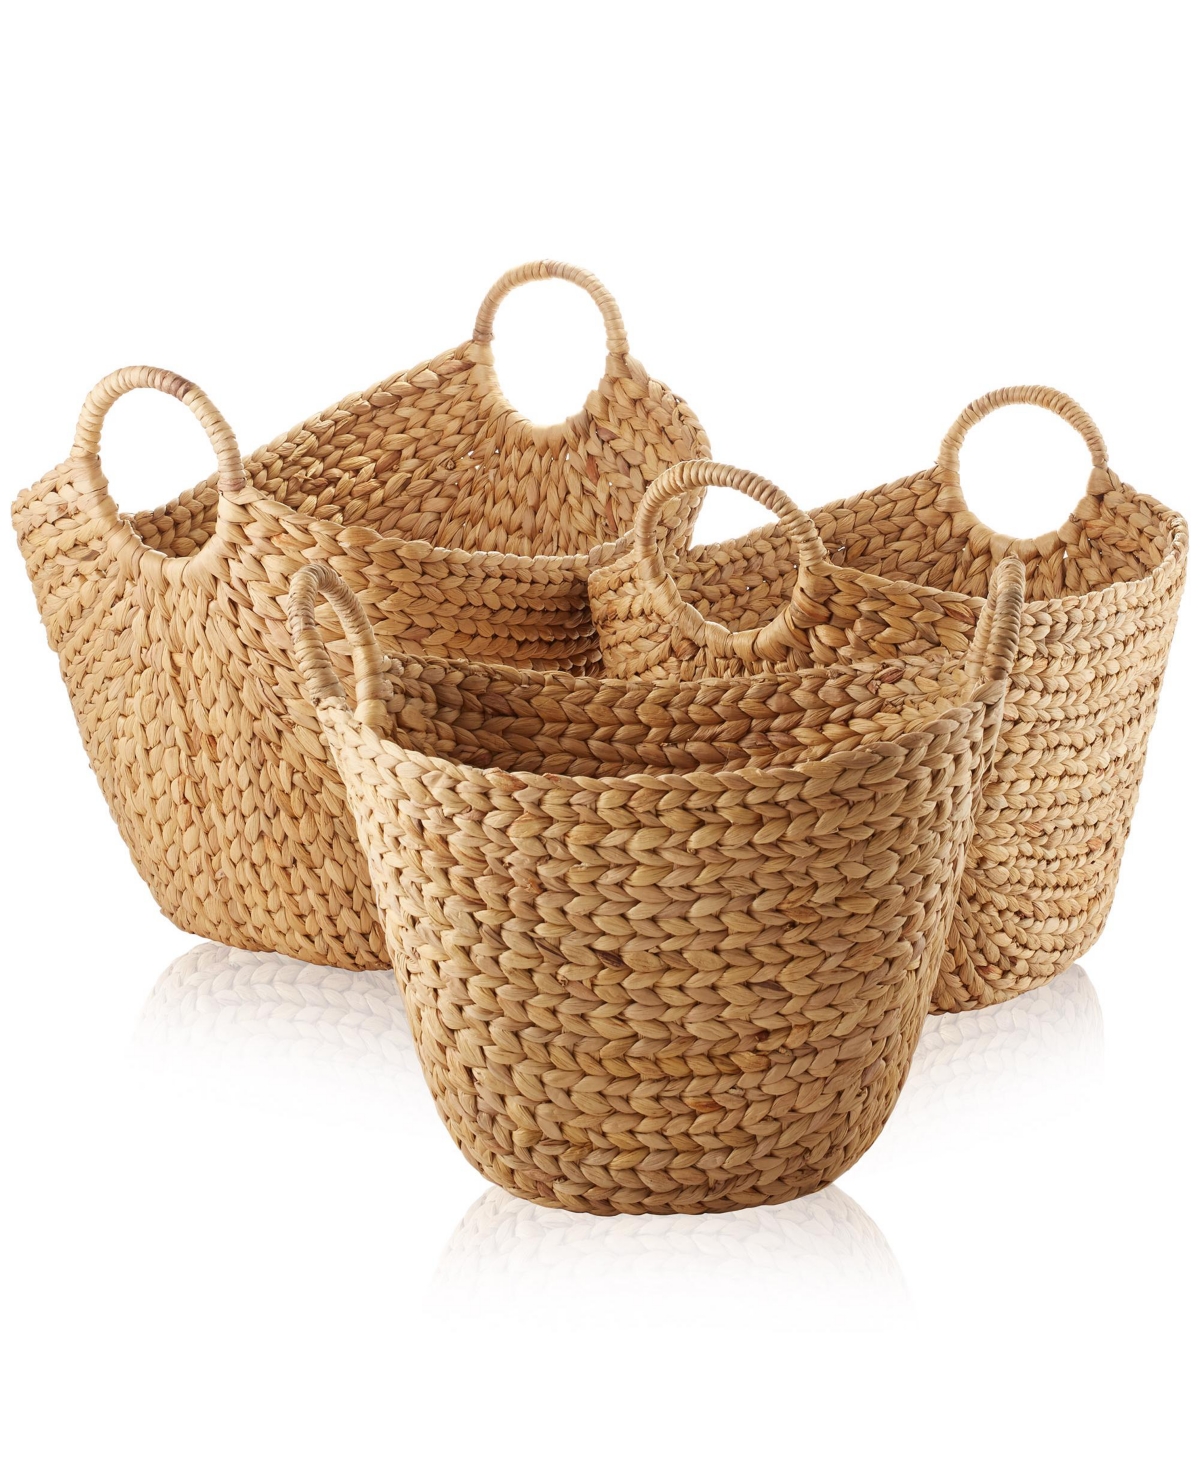 Set of 3 Boat Baskets with Handles, Woven Water Hyacinth Storage Organizers for Blankets, Laundry, Bathroom, Bedroom, Living Room - Natural